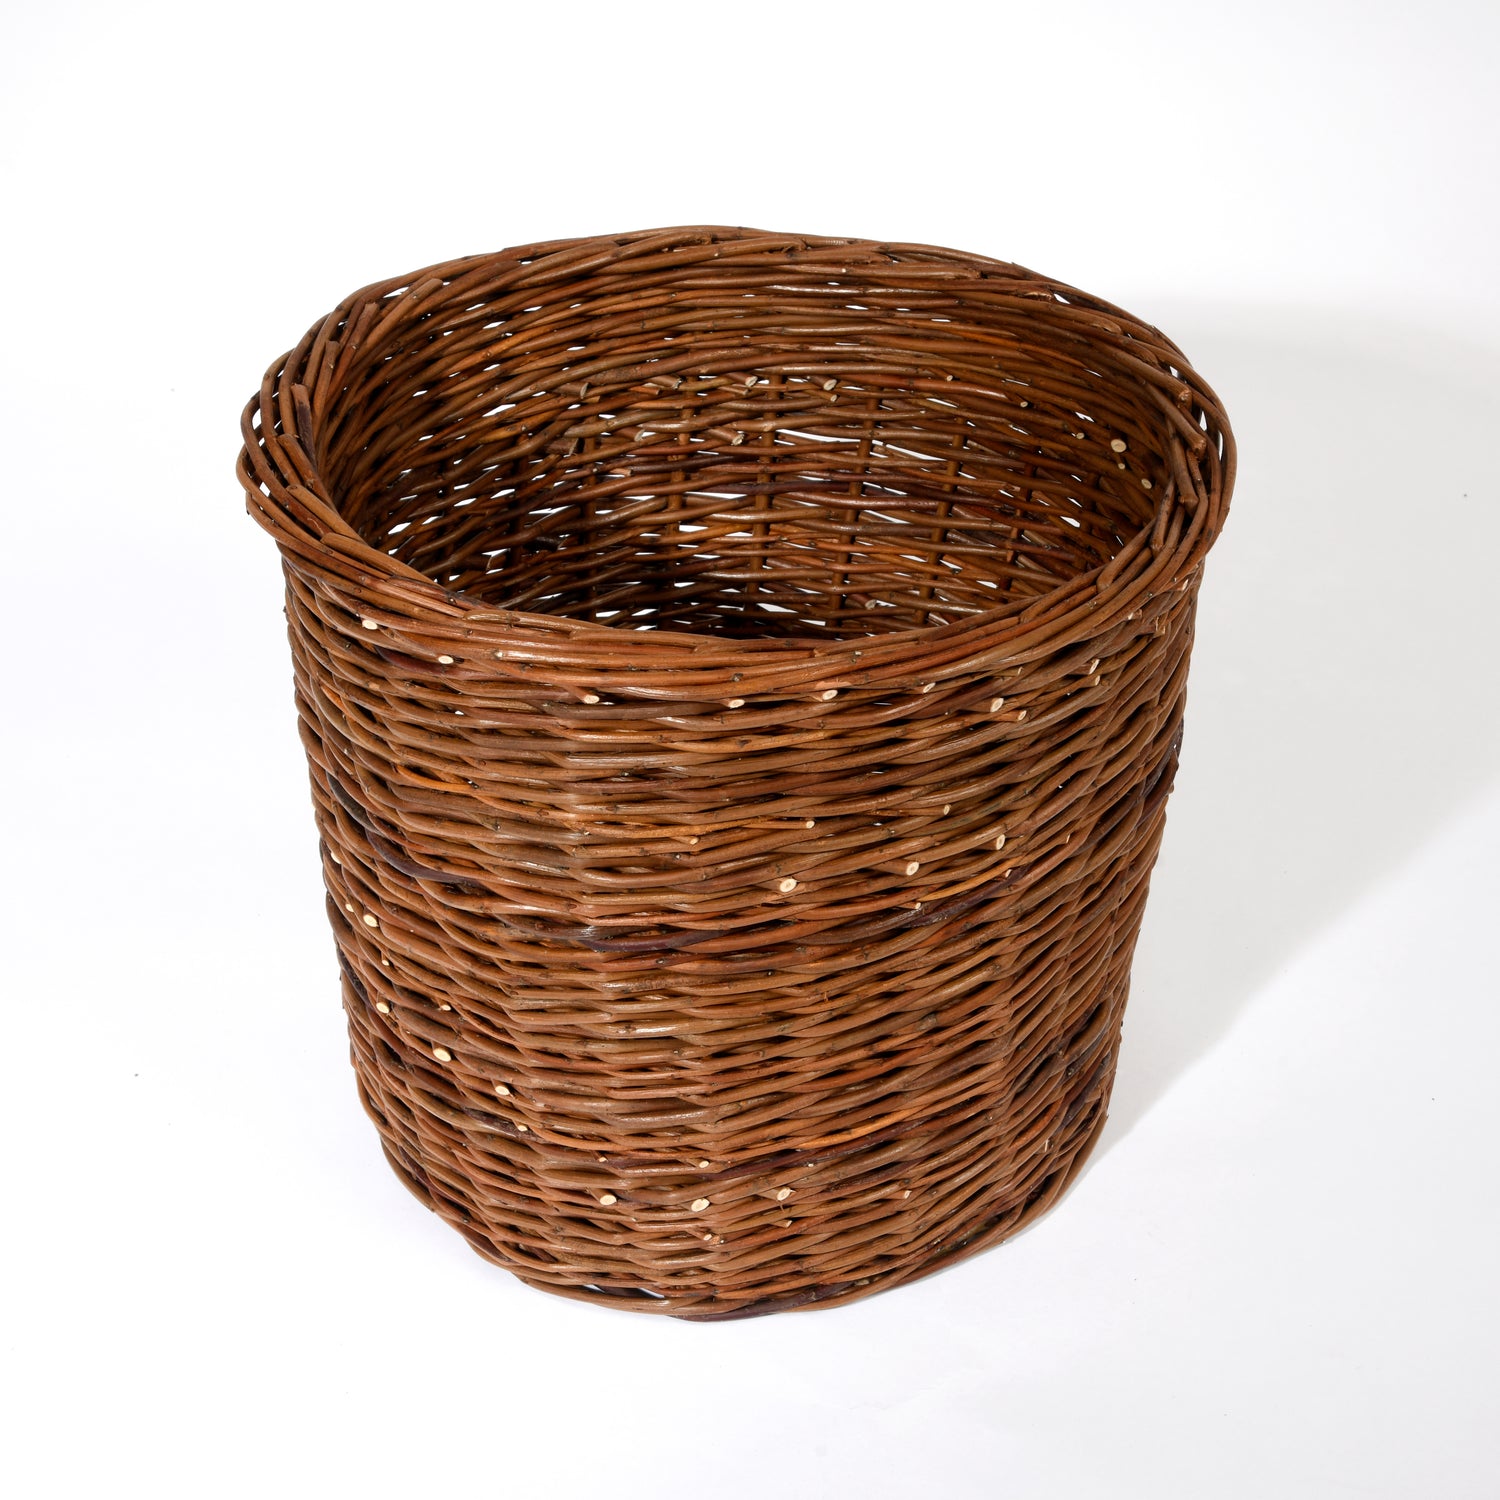 Kindling basket-Hand crafted, local, sustainable, authentic and beautiful.